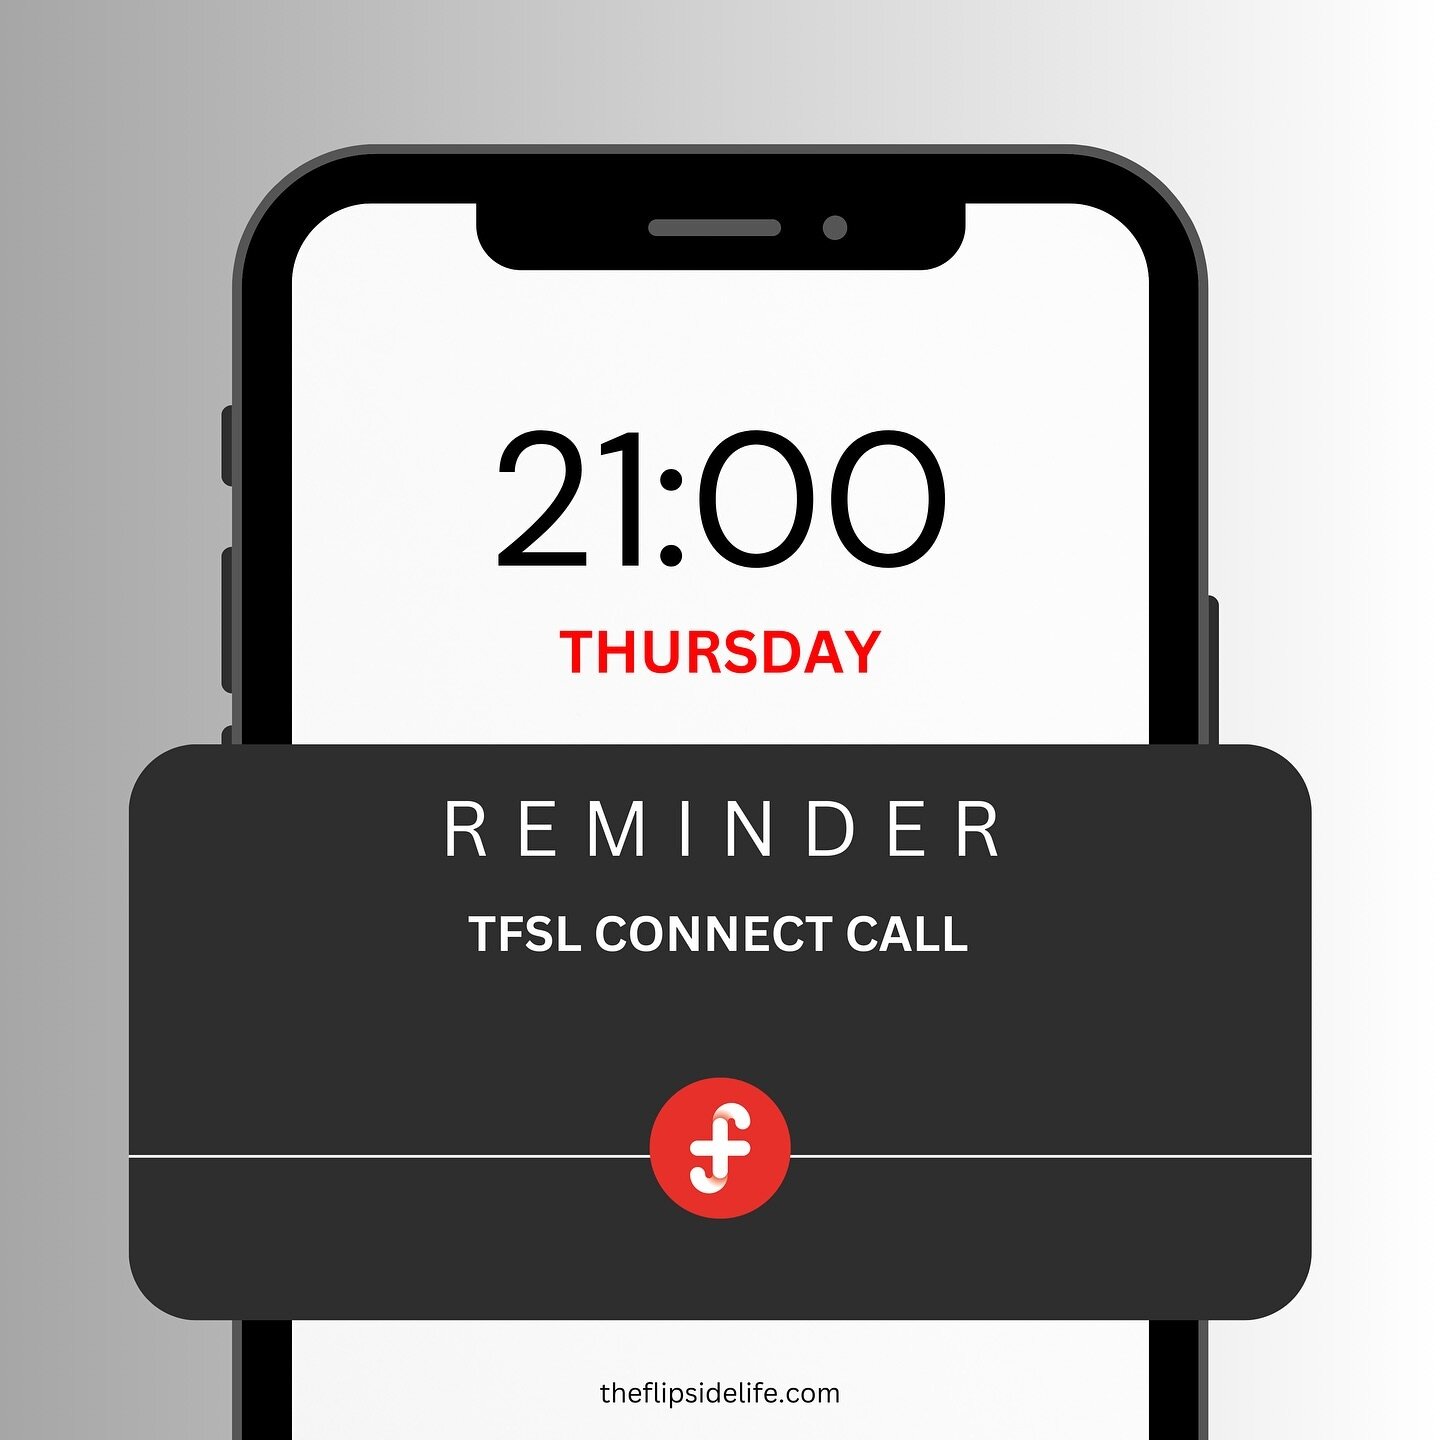 Connection. Understanding. Support. Friendship.  All of the above is what you can expect to find when you join a TFSL Connect Call.   Thursdays 9-10pm EST. 

Connect Calls are confidential. There is no cost to join and no sign-up is required. Turn yo